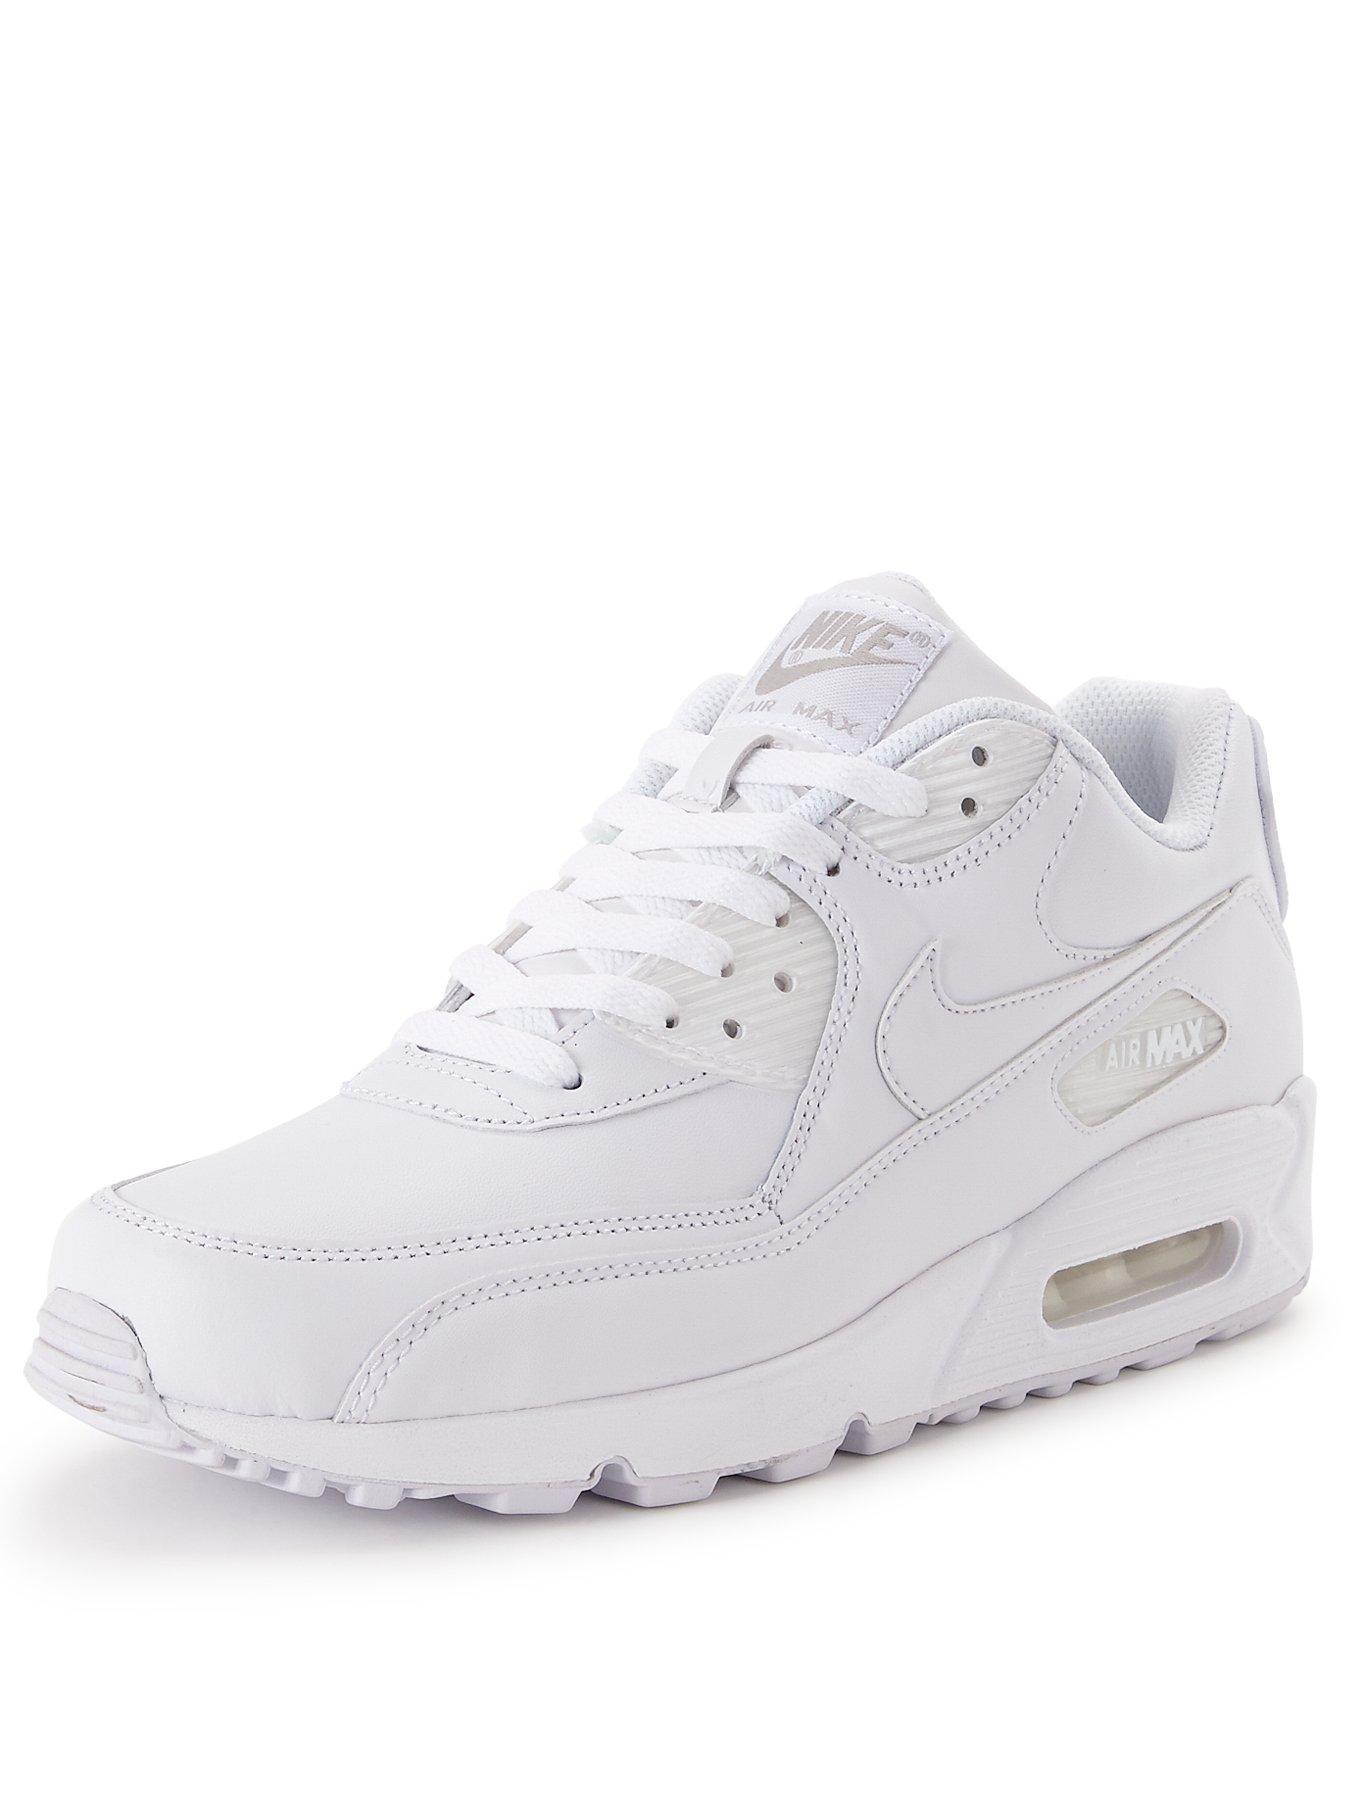 white air max 90 leather mens